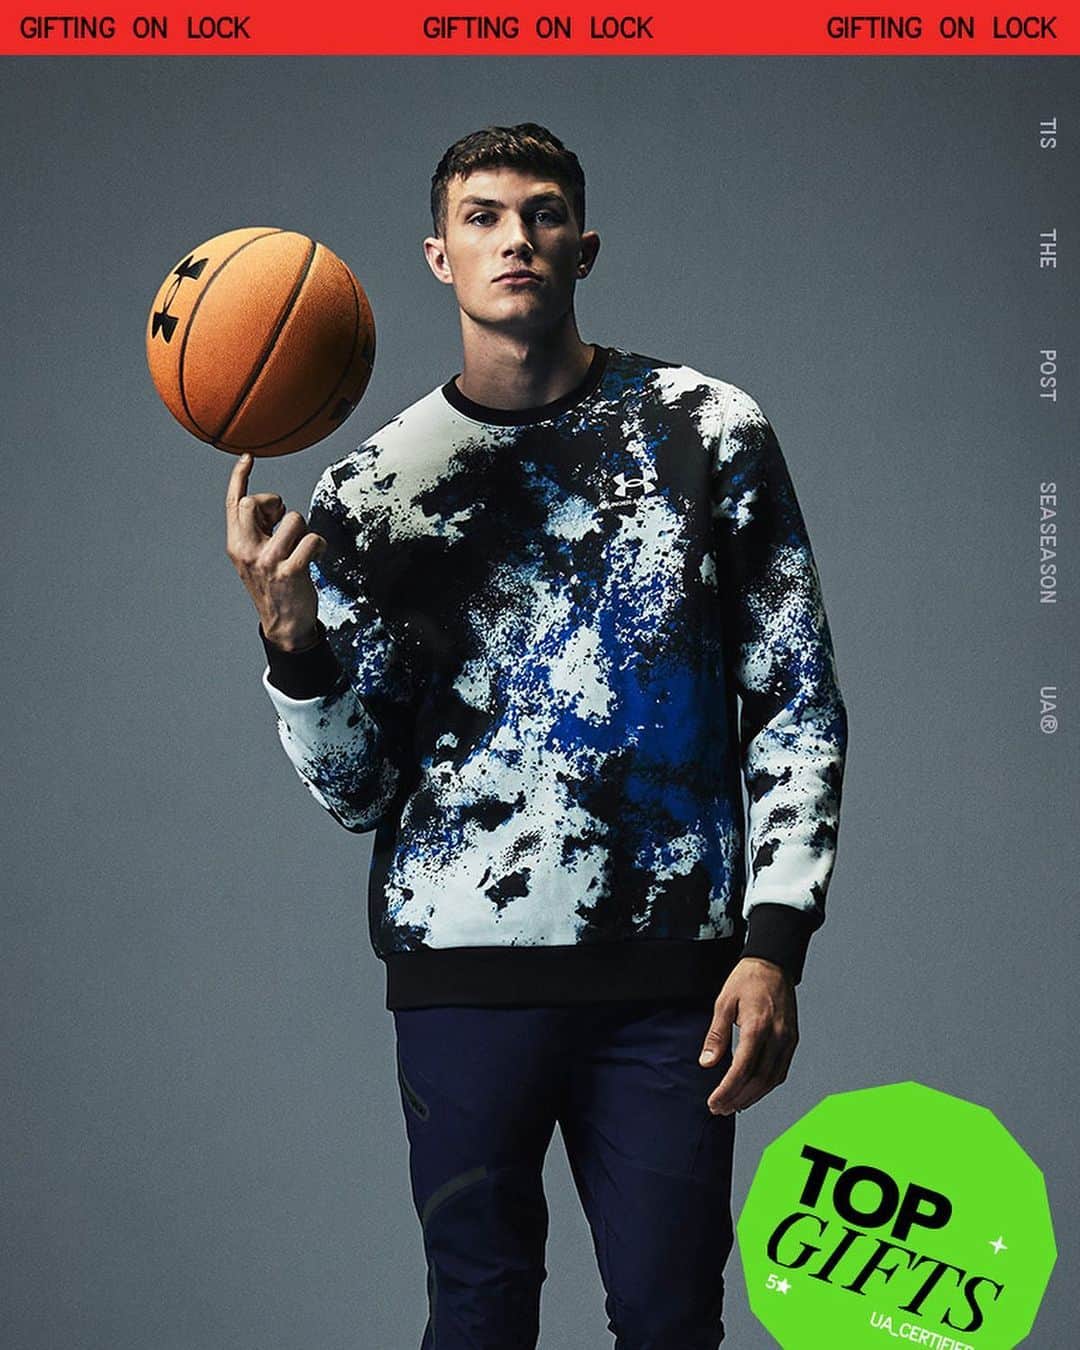 Under Armourのインスタグラム：「Fleece for all! Treat yourself to pre-game gear that has athletes feeling bold and confident on and off the court❄️」